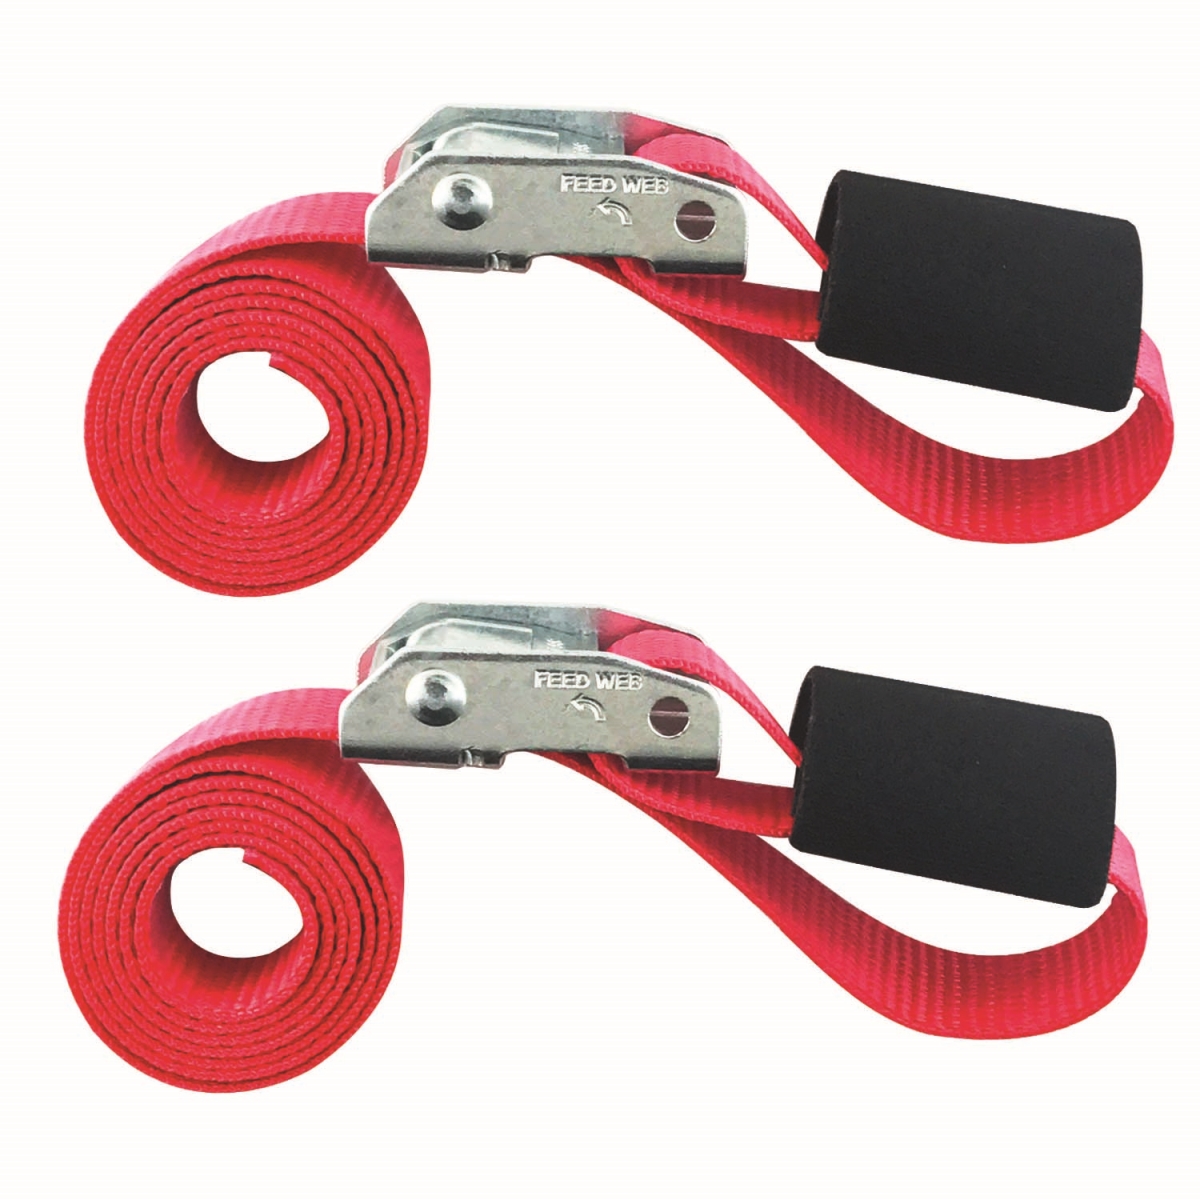 Sltc104cr2 1 In. X 4 Ft. Cinch Cam Strap - Red, Pack Of 2